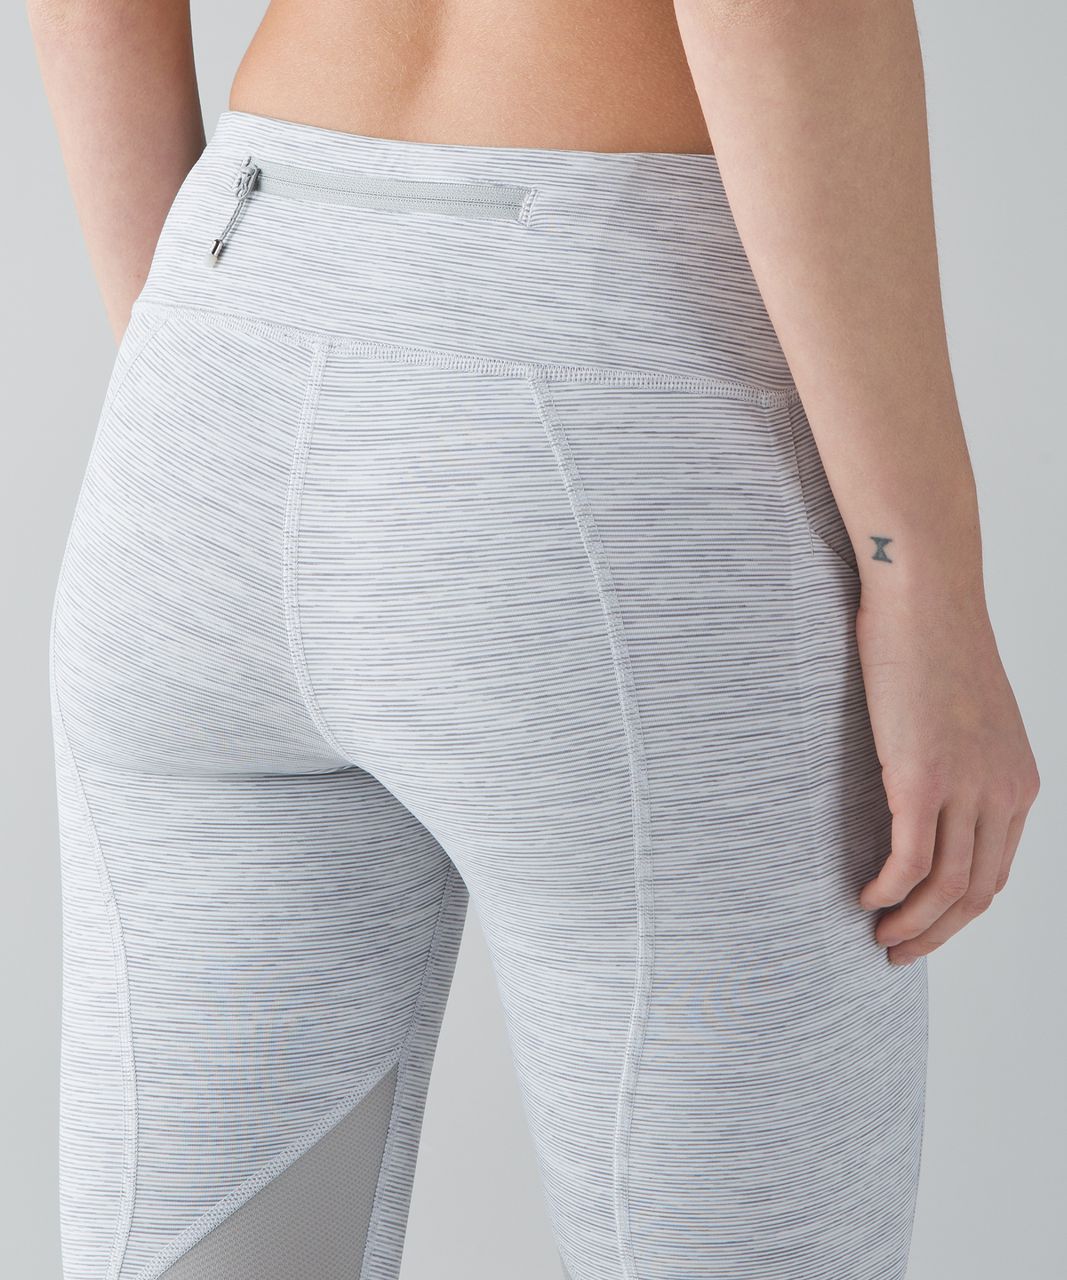 Lululemon Pace Rival Crop - Wee Are From Space Nimbus Battleship / Seal Grey